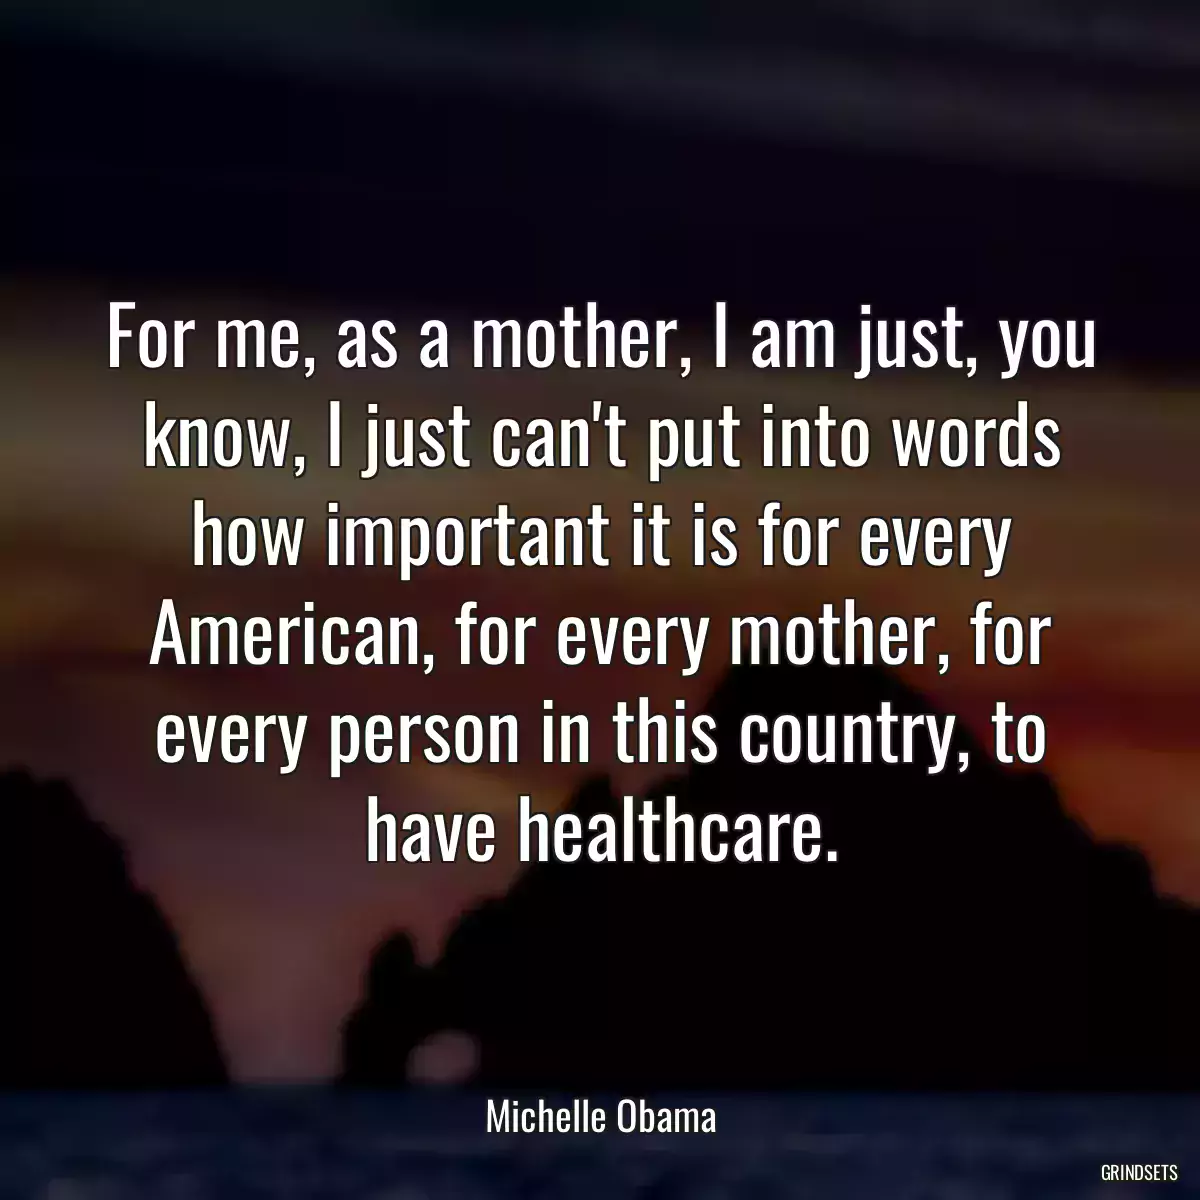 For me, as a mother, I am just, you know, I just can\'t put into words how important it is for every American, for every mother, for every person in this country, to have healthcare.